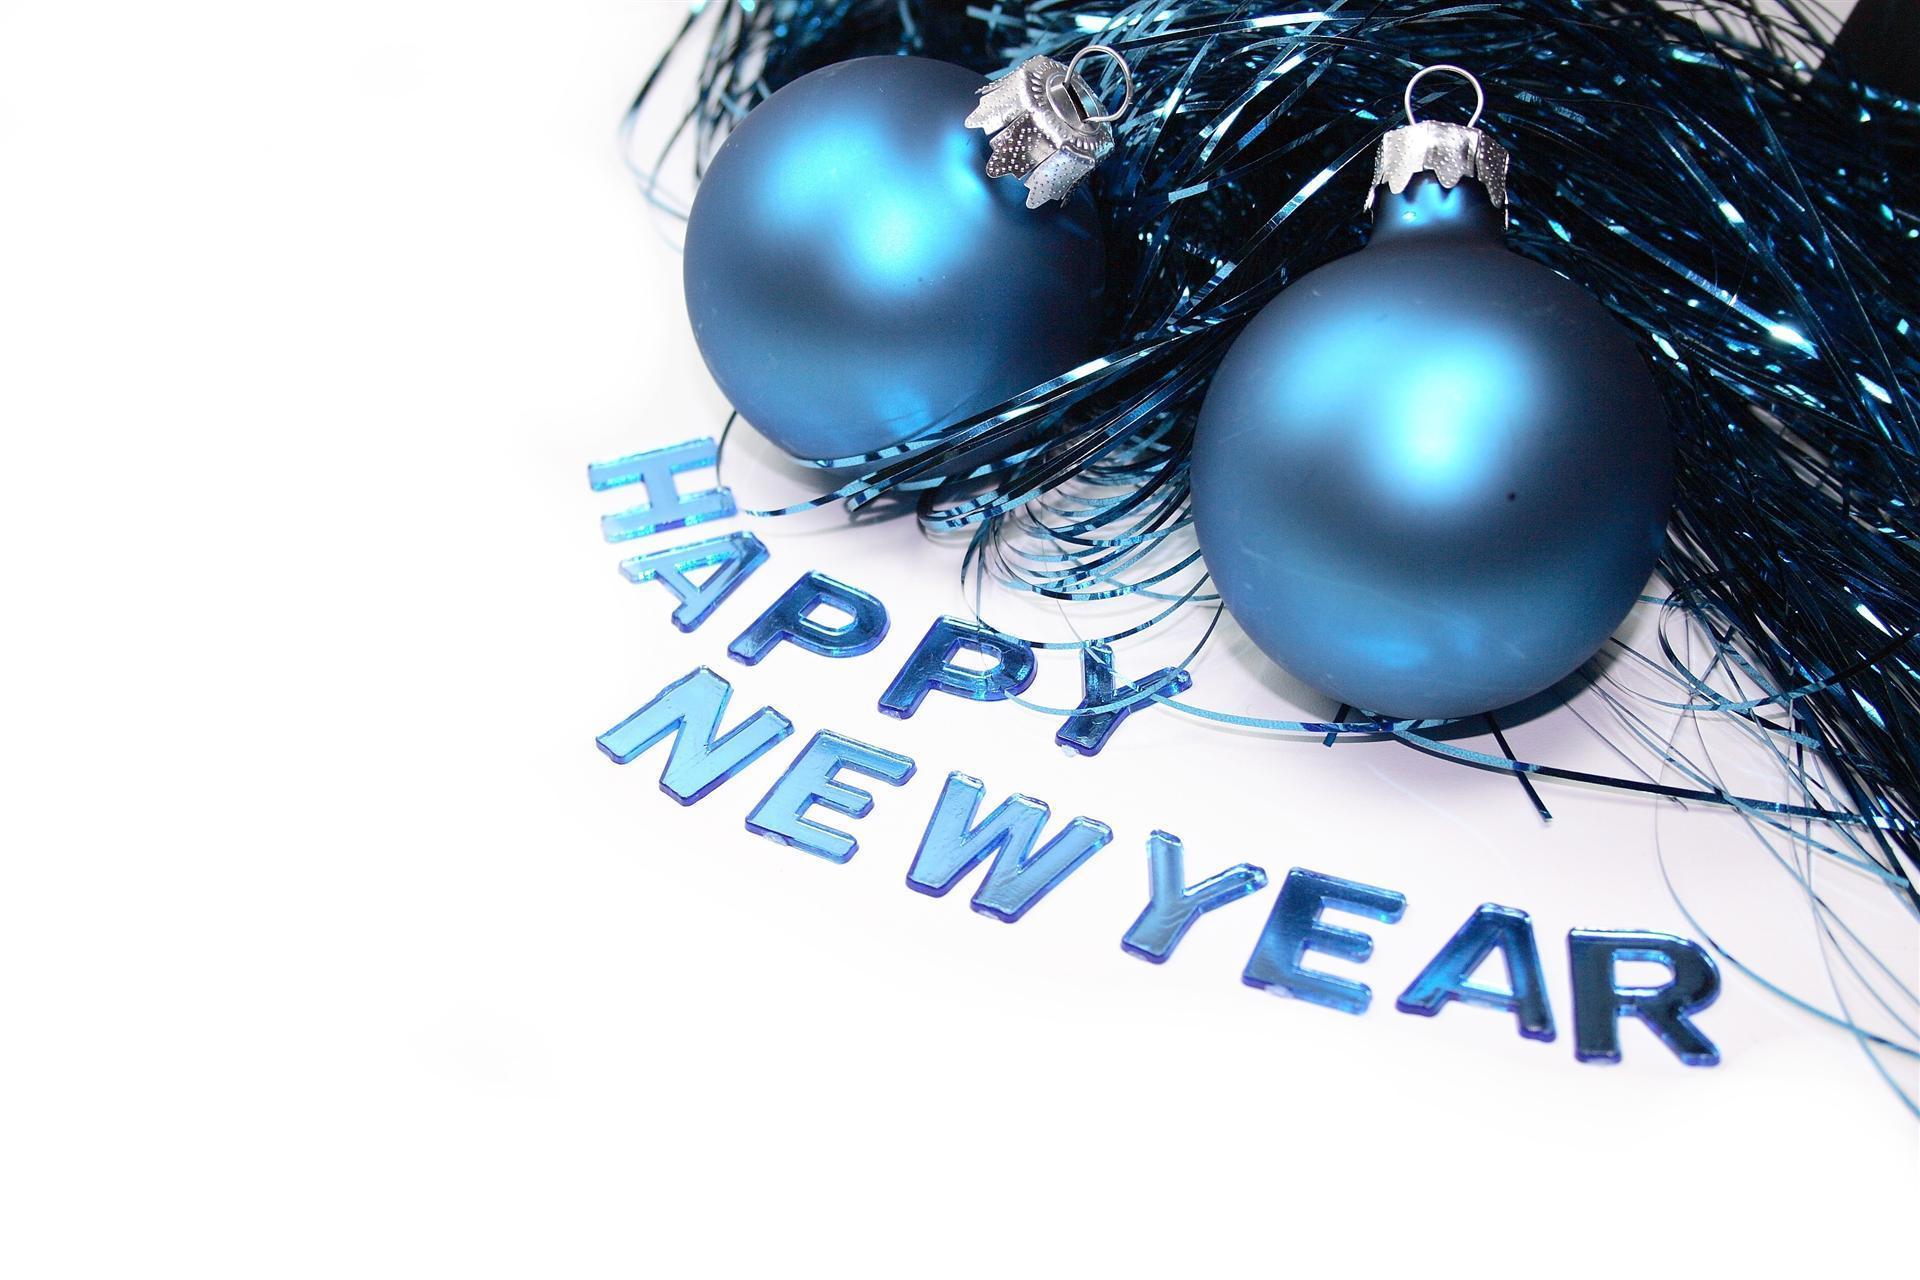 Happy New Year Wallpaper Free Download High 1920x1280PX